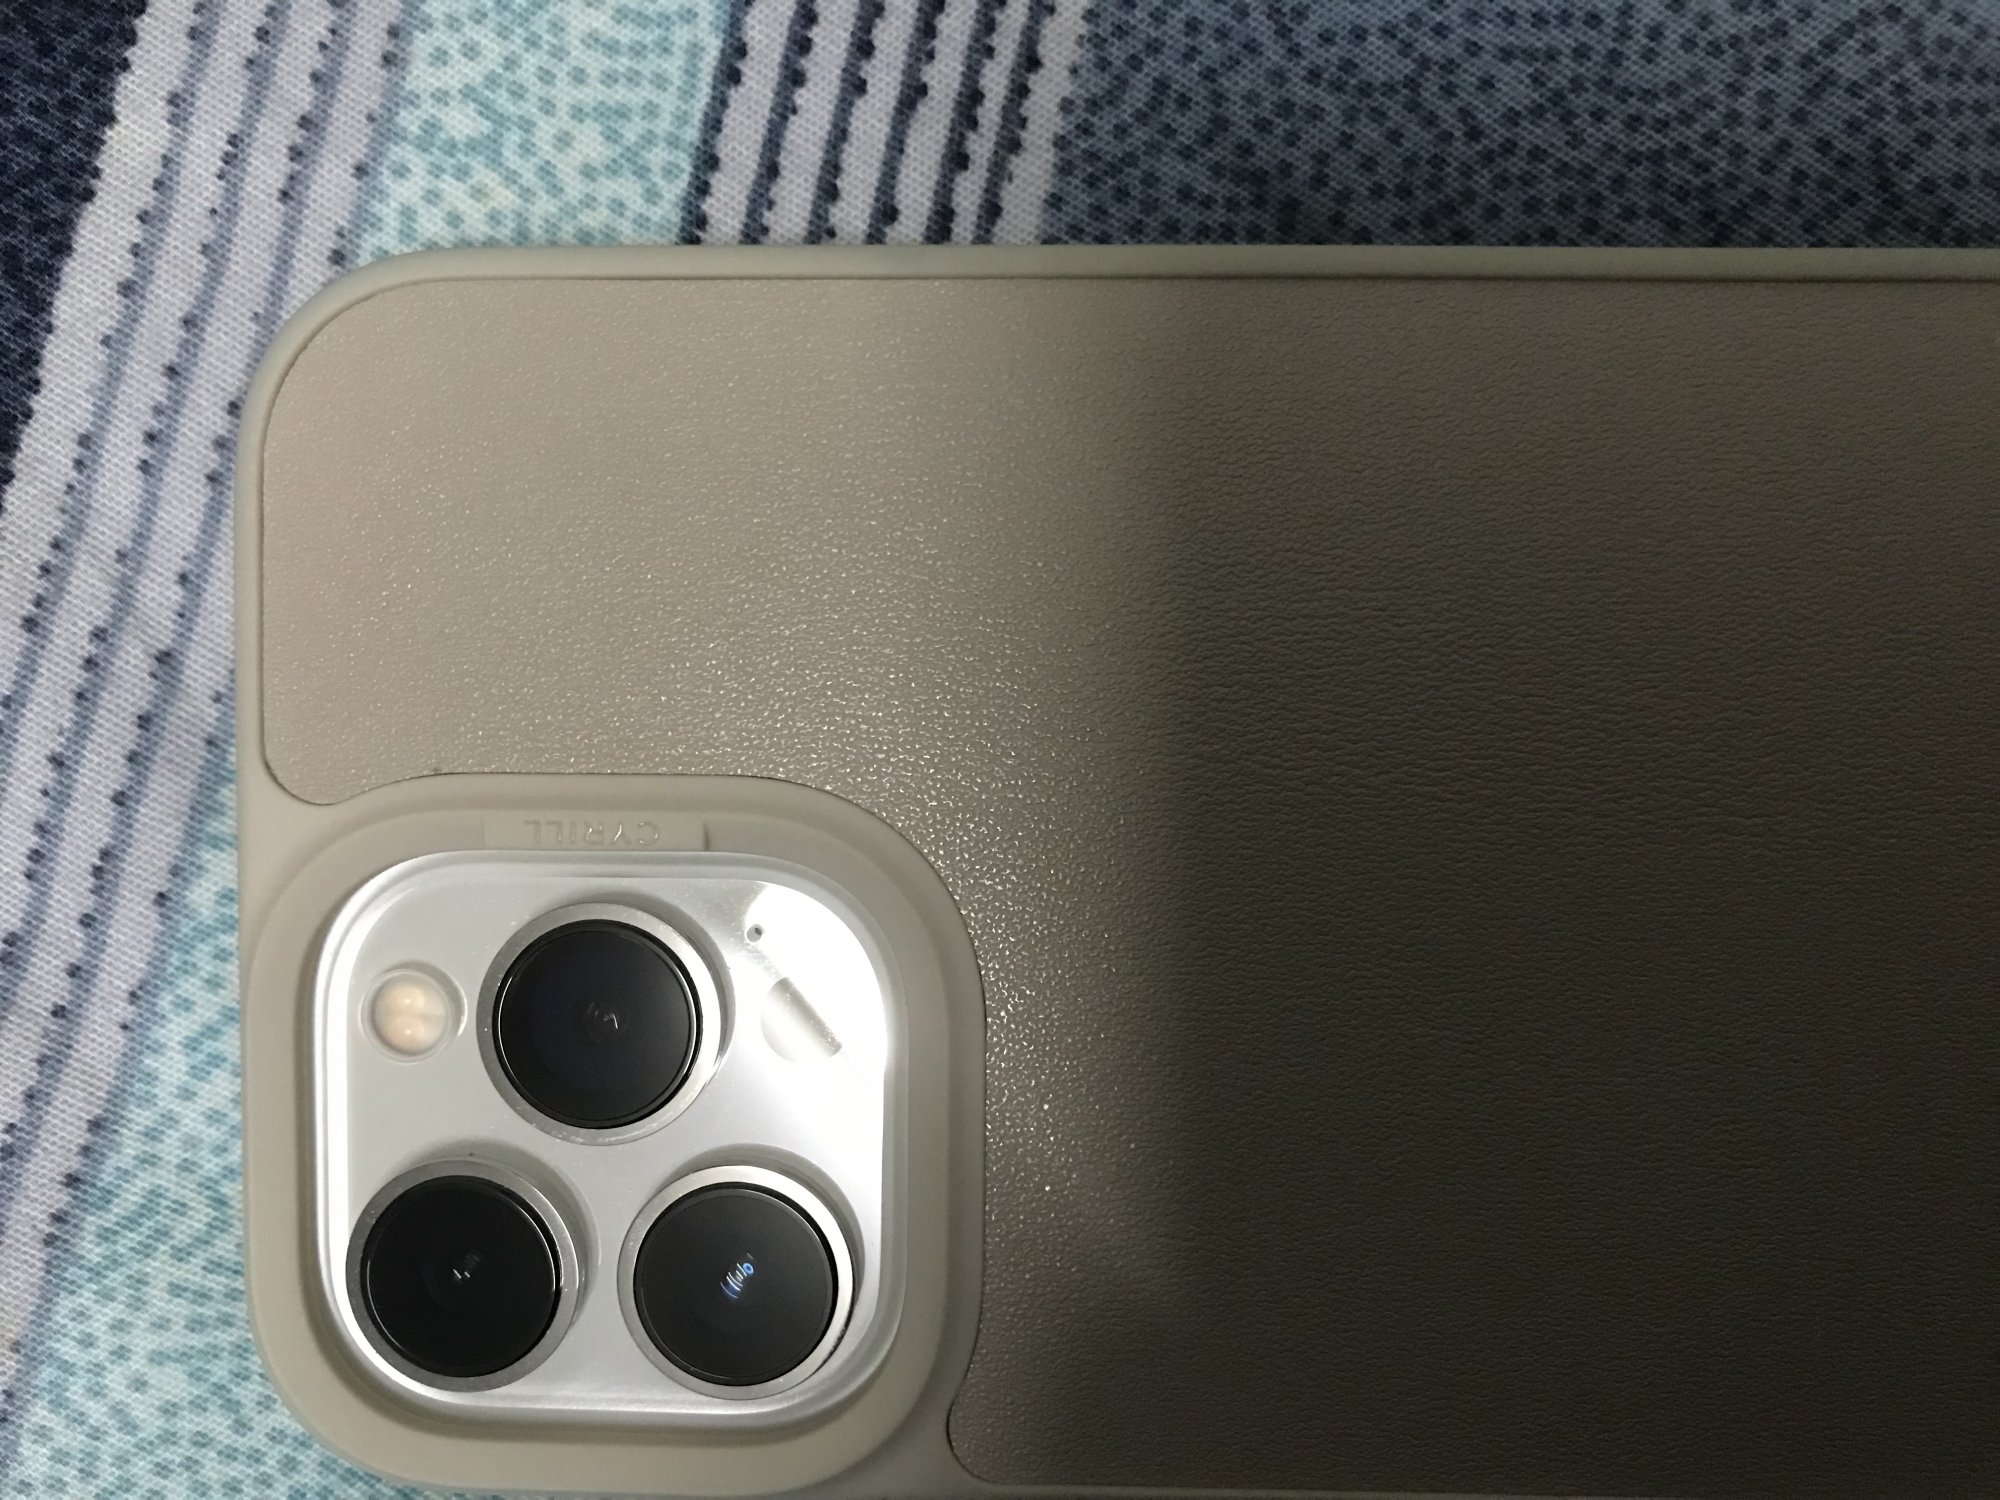 Do scratches on iPhone camera lens matter?